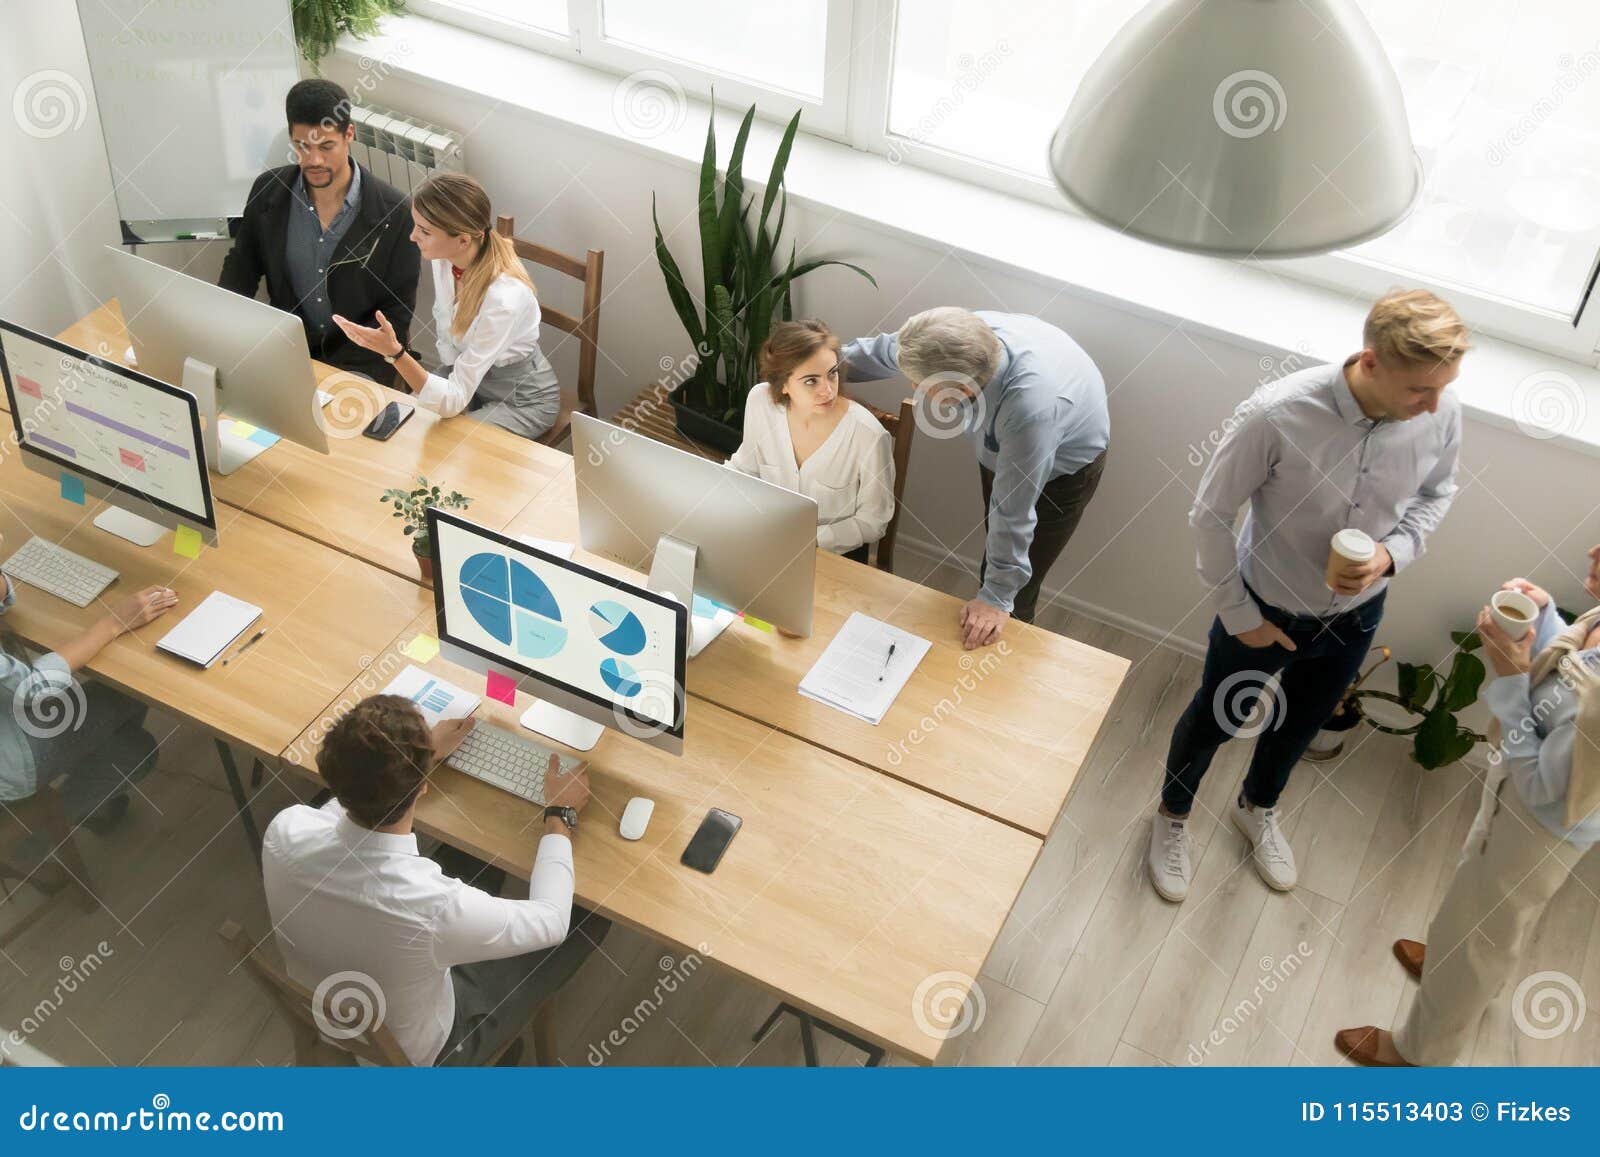 office employees working together sharing desk using computers i